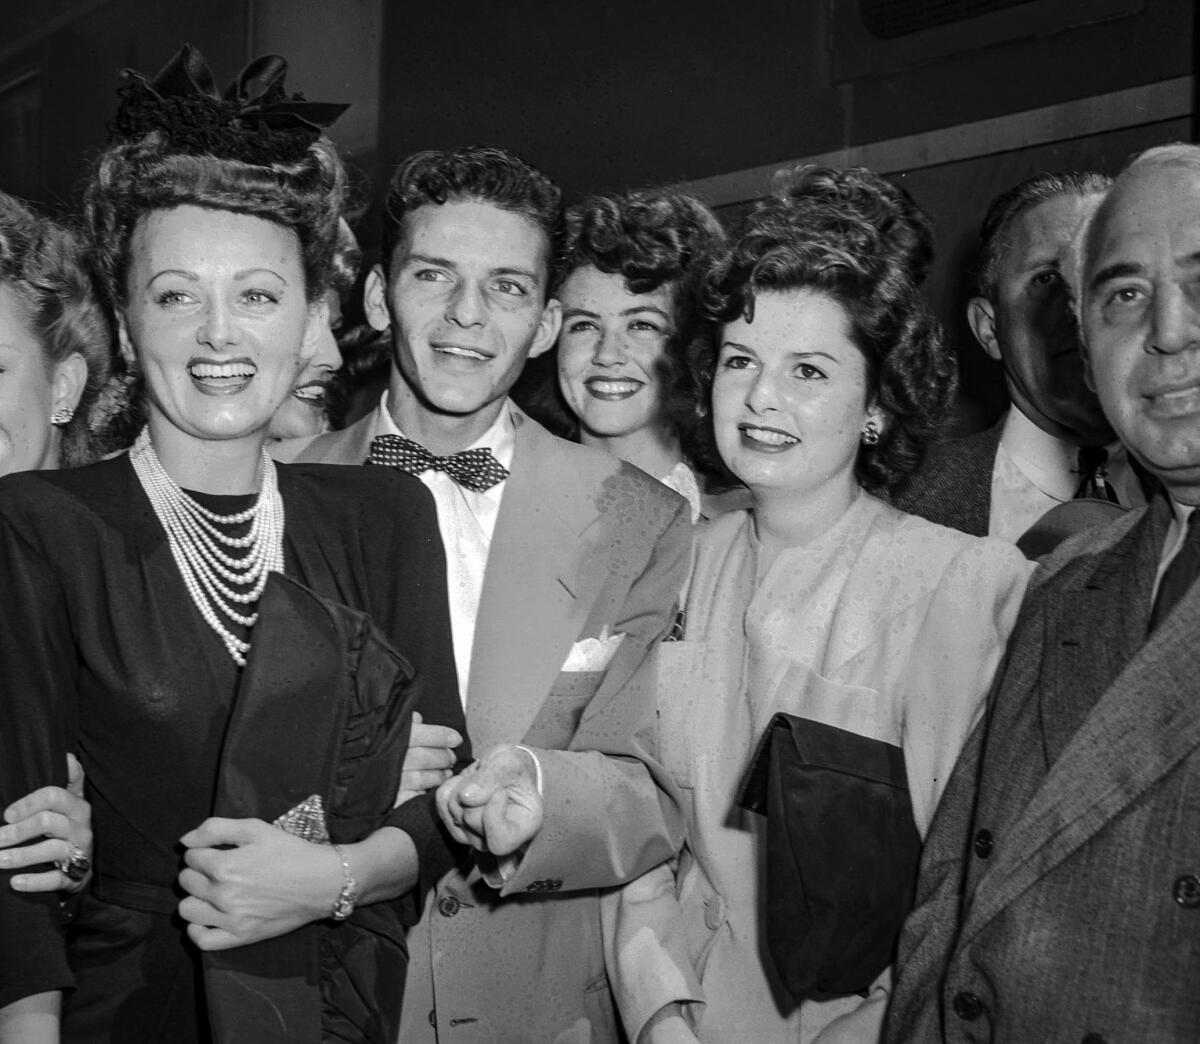 Aug. 11, 1943:  Frank Sinatra with unidentified friends arrives by train in Pasadena. 